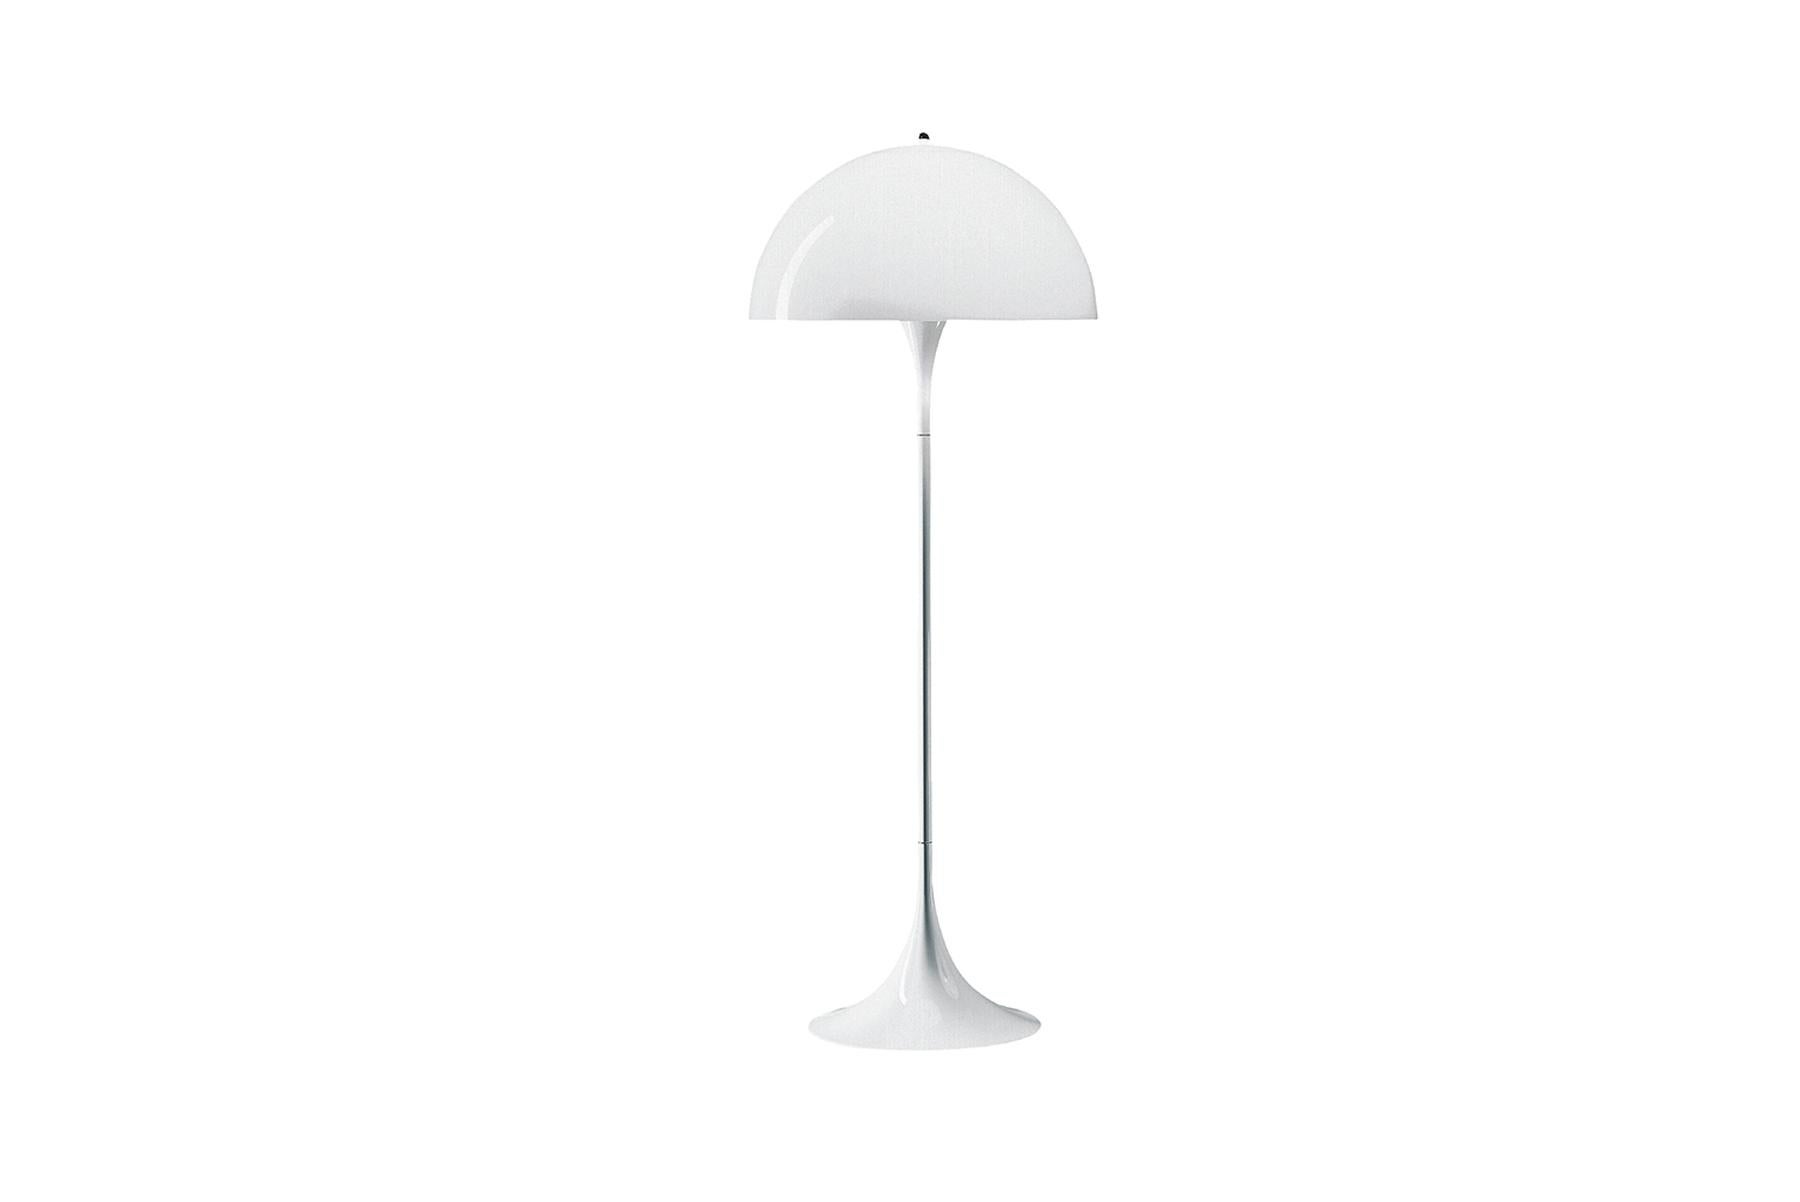 The fixture emits a soft and comfortable illumination. The hemispherical shade reflects the light downwards, and the material used ensures that the majority of the light is spread diffusely in the room from the surface of the shade. Panthella Floor